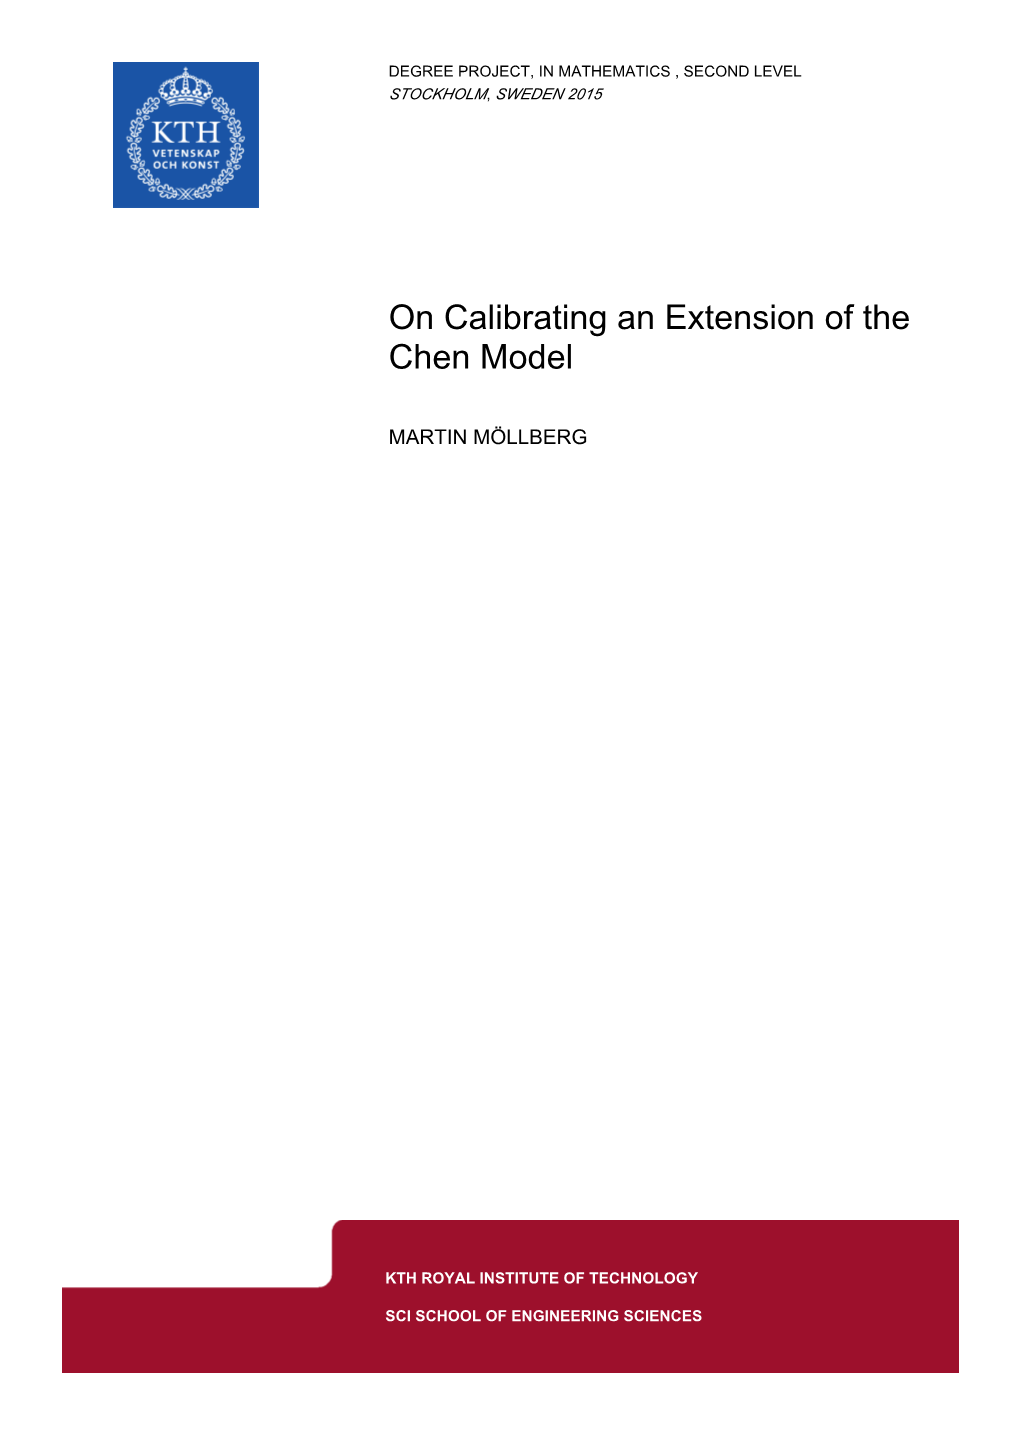 On Calibrating an Extension of the Chen Model